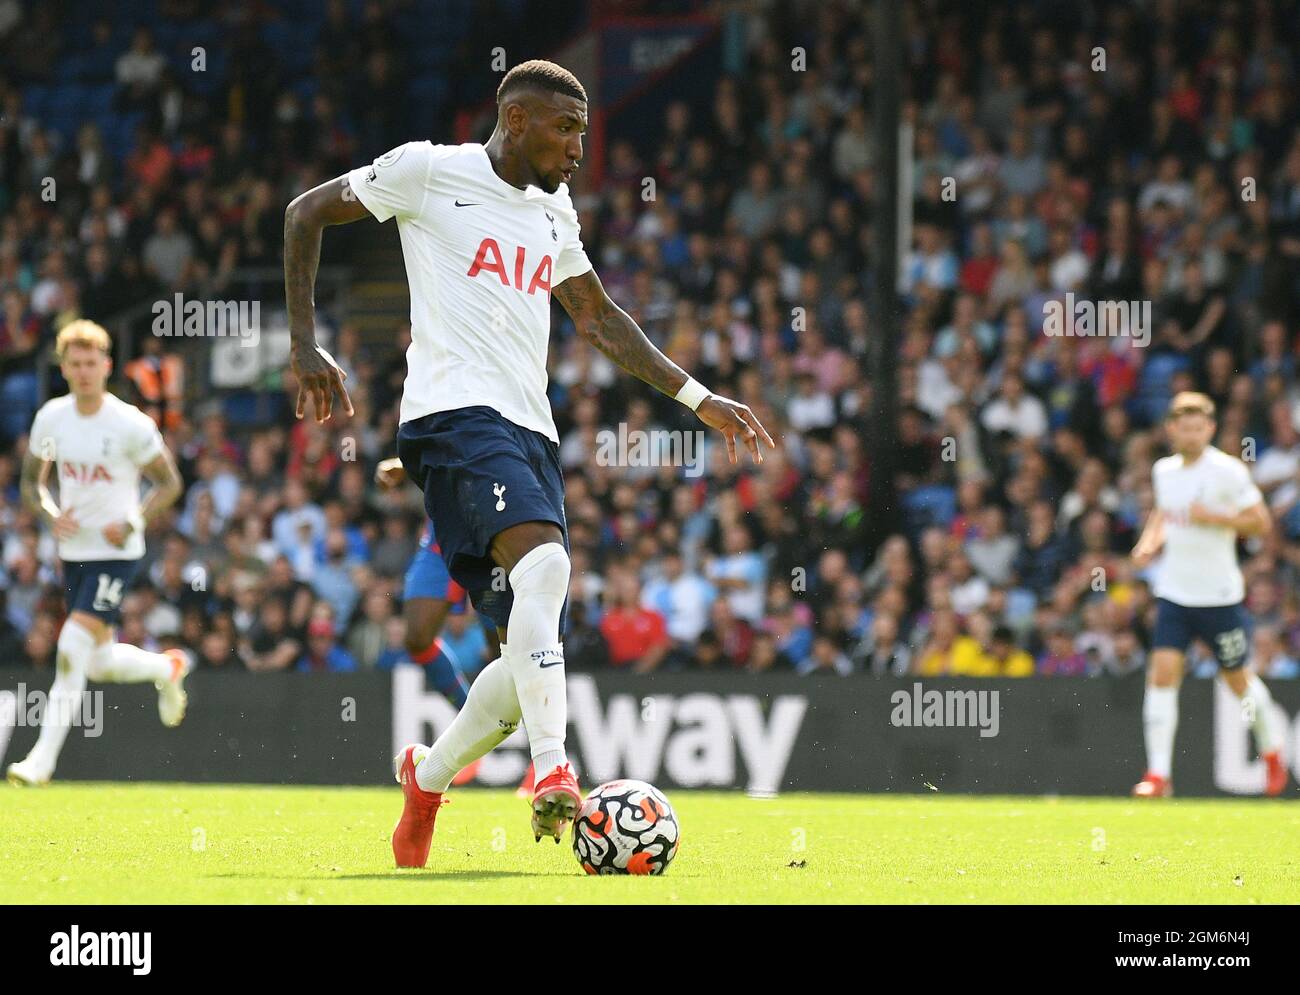 LONDON, ENGLAND - SEPTEMBER 11, 2021: Emerson Royal (Emerson Aparecido Leite  de Souza Junior) of Tottenham pictured during the 2021/22 Premier League  matchweek 4 game between Crystal Palace FC and Tottenham Hotspur